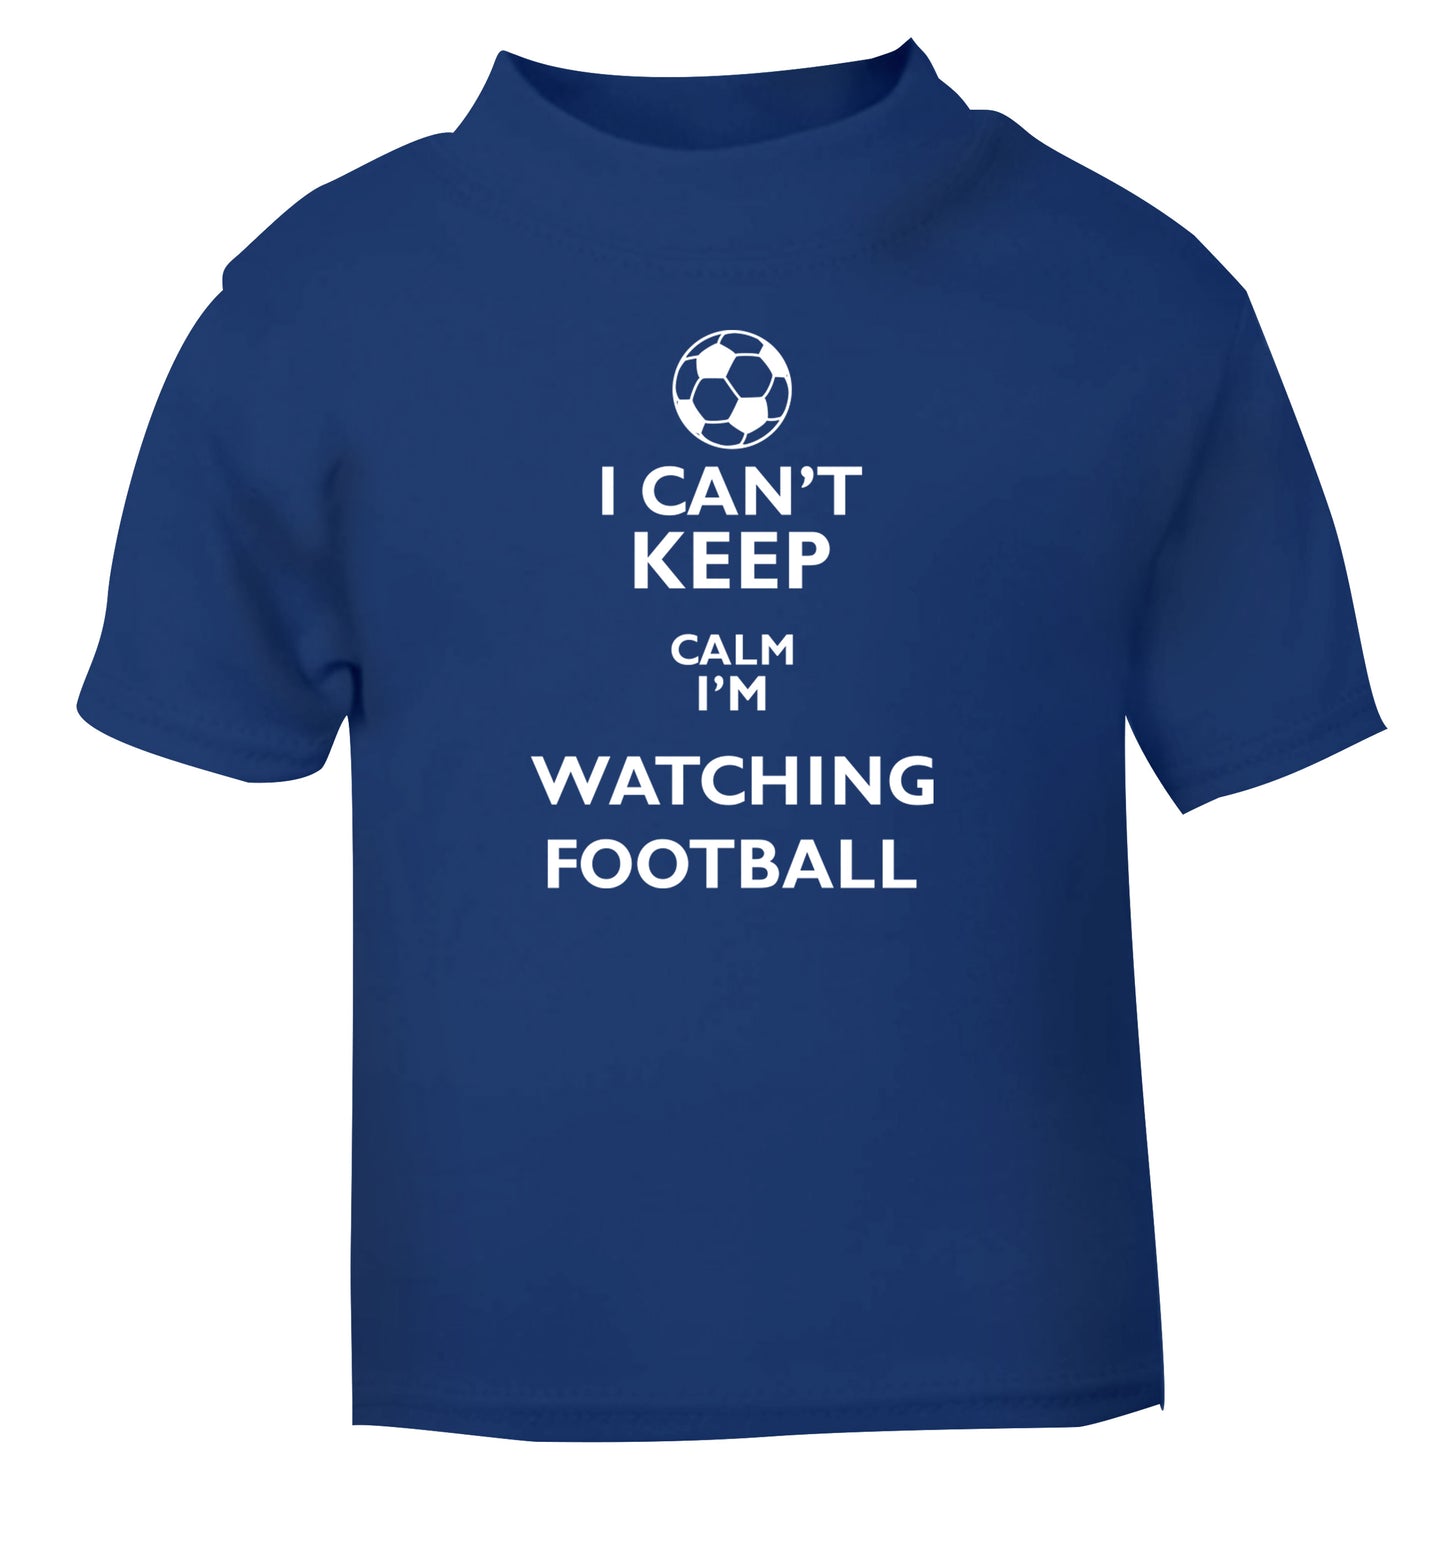 I can't keep calm I'm watching the football blue Baby Toddler Tshirt 2 Years